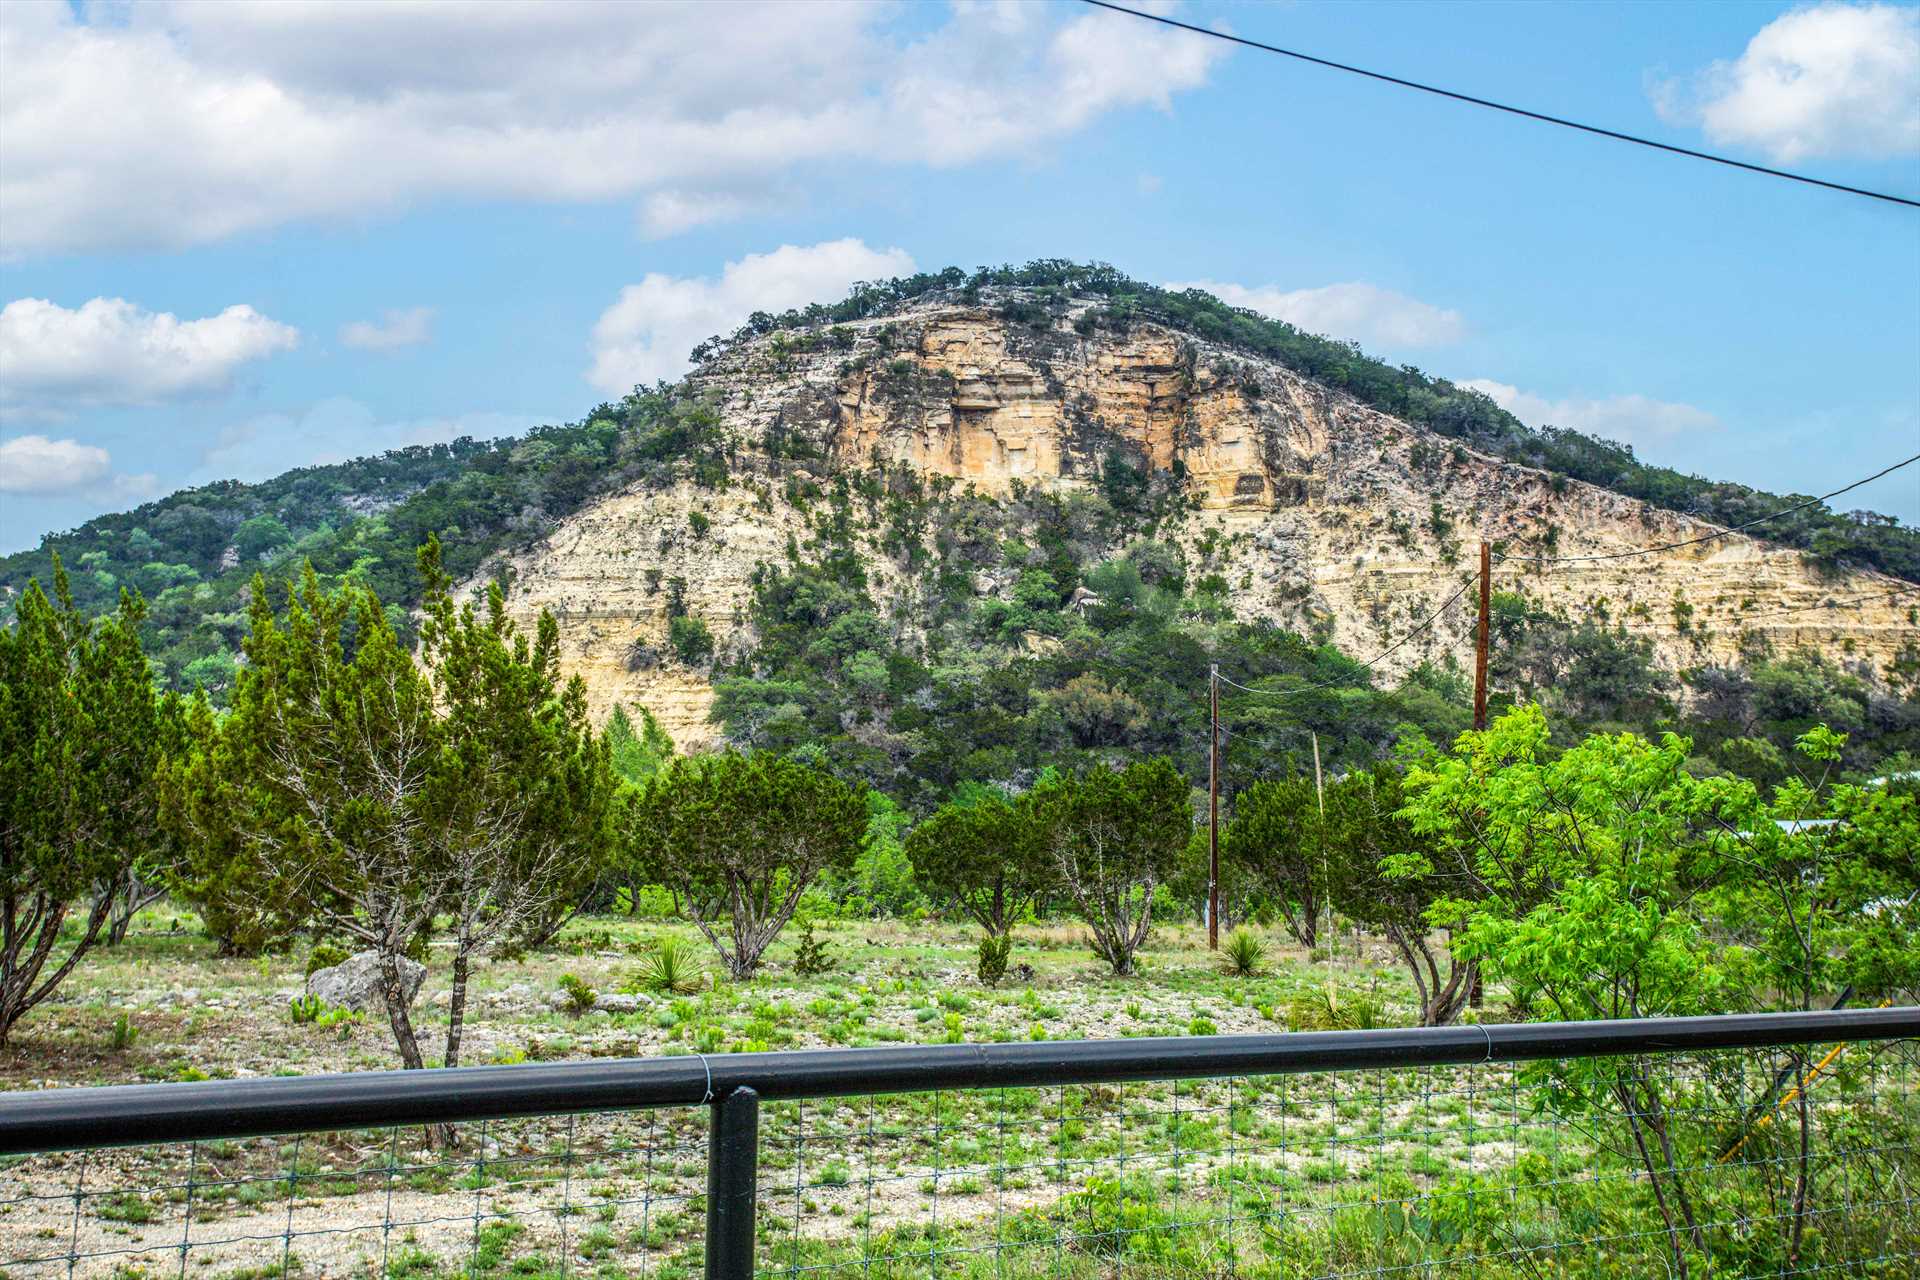                                                 We like to share photos of this inspiring mountain view to people who think Texas is flat and boring!